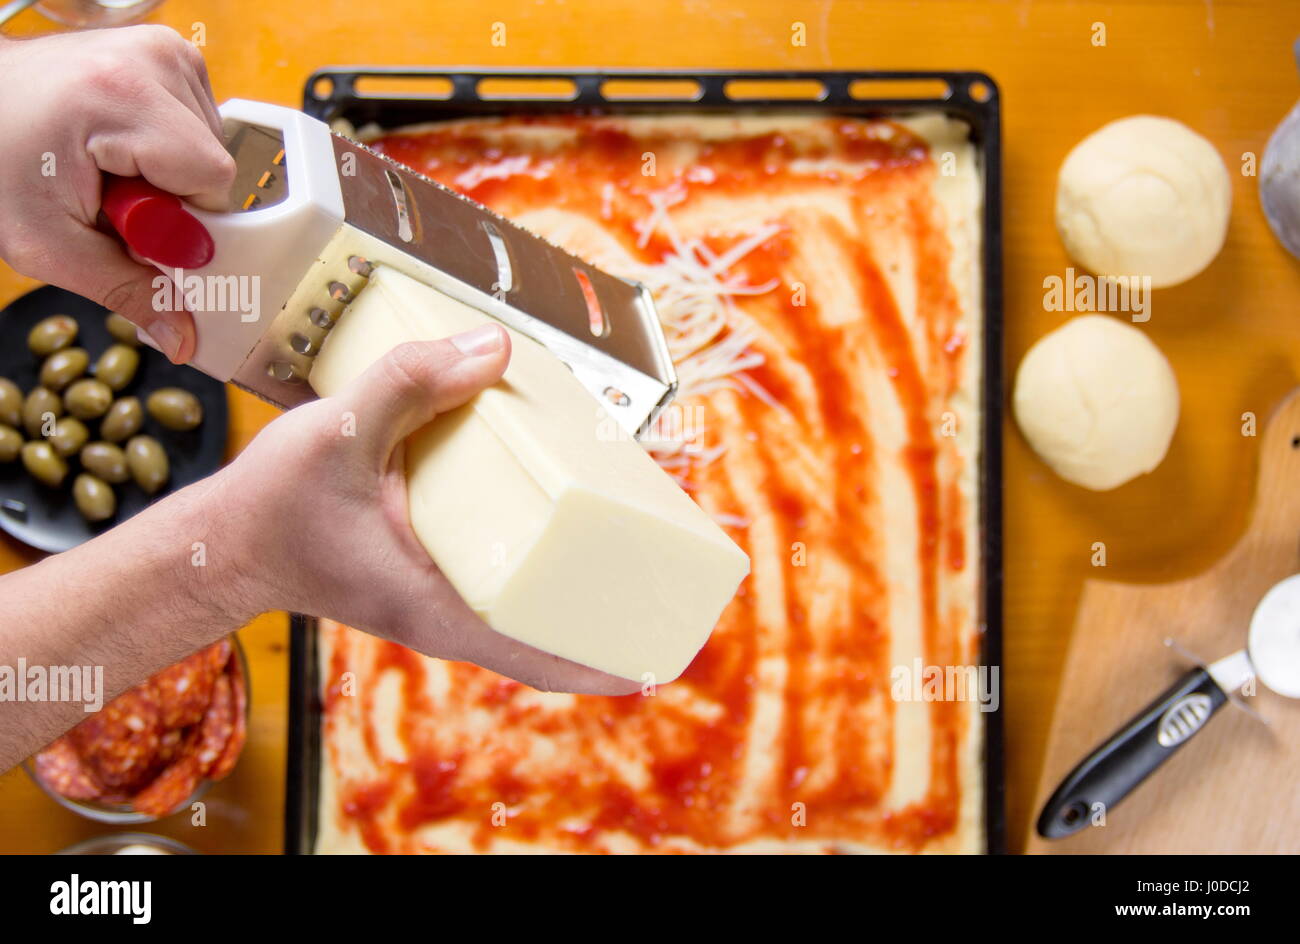 Man grating cheese on a pizza base. Making pizza Stock Photo